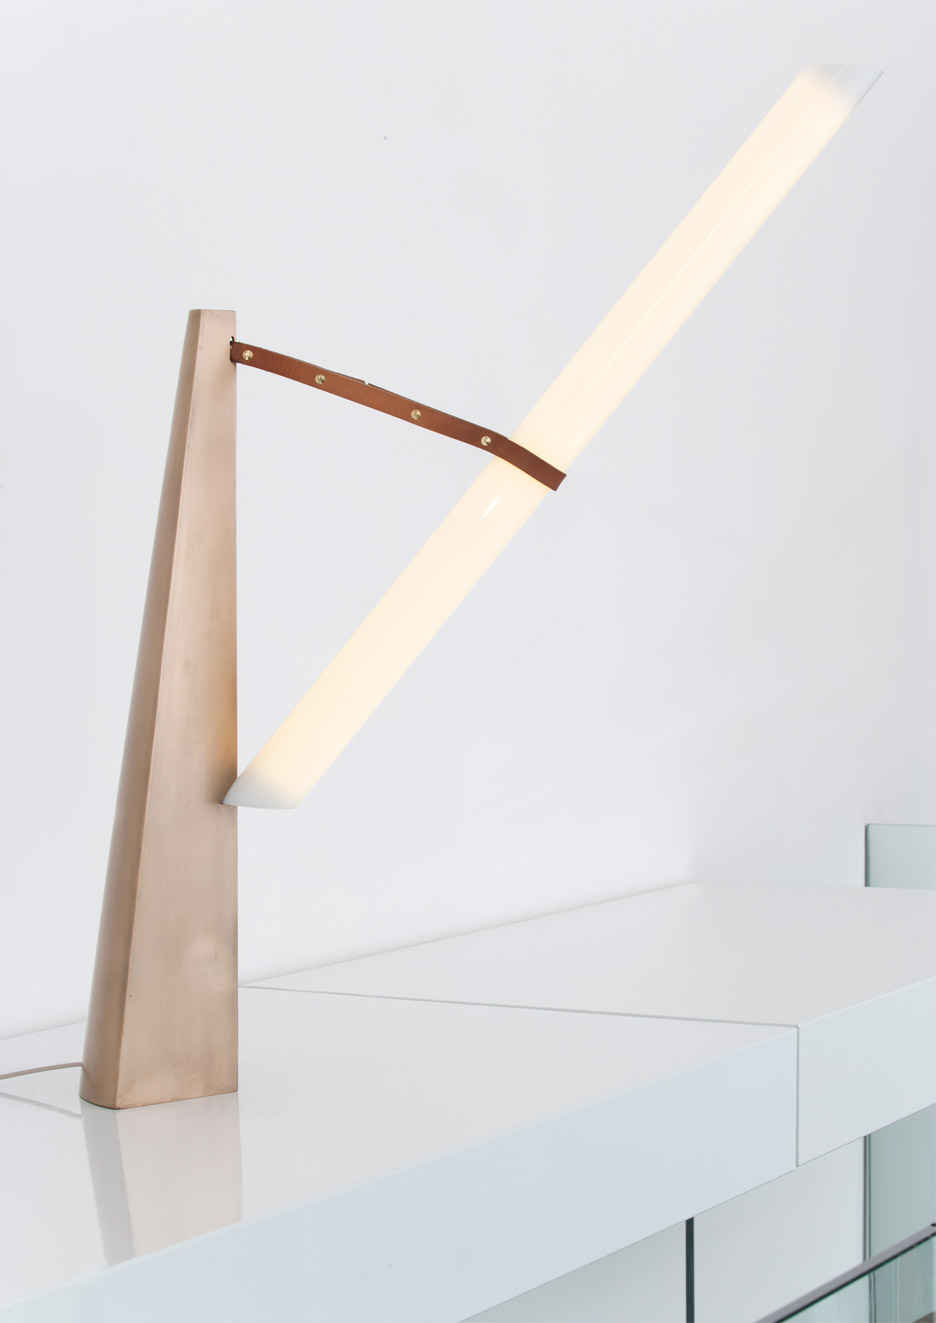 Bec Brittain designs architectural looking lamps for the Patrick Parrish Gallery in New York